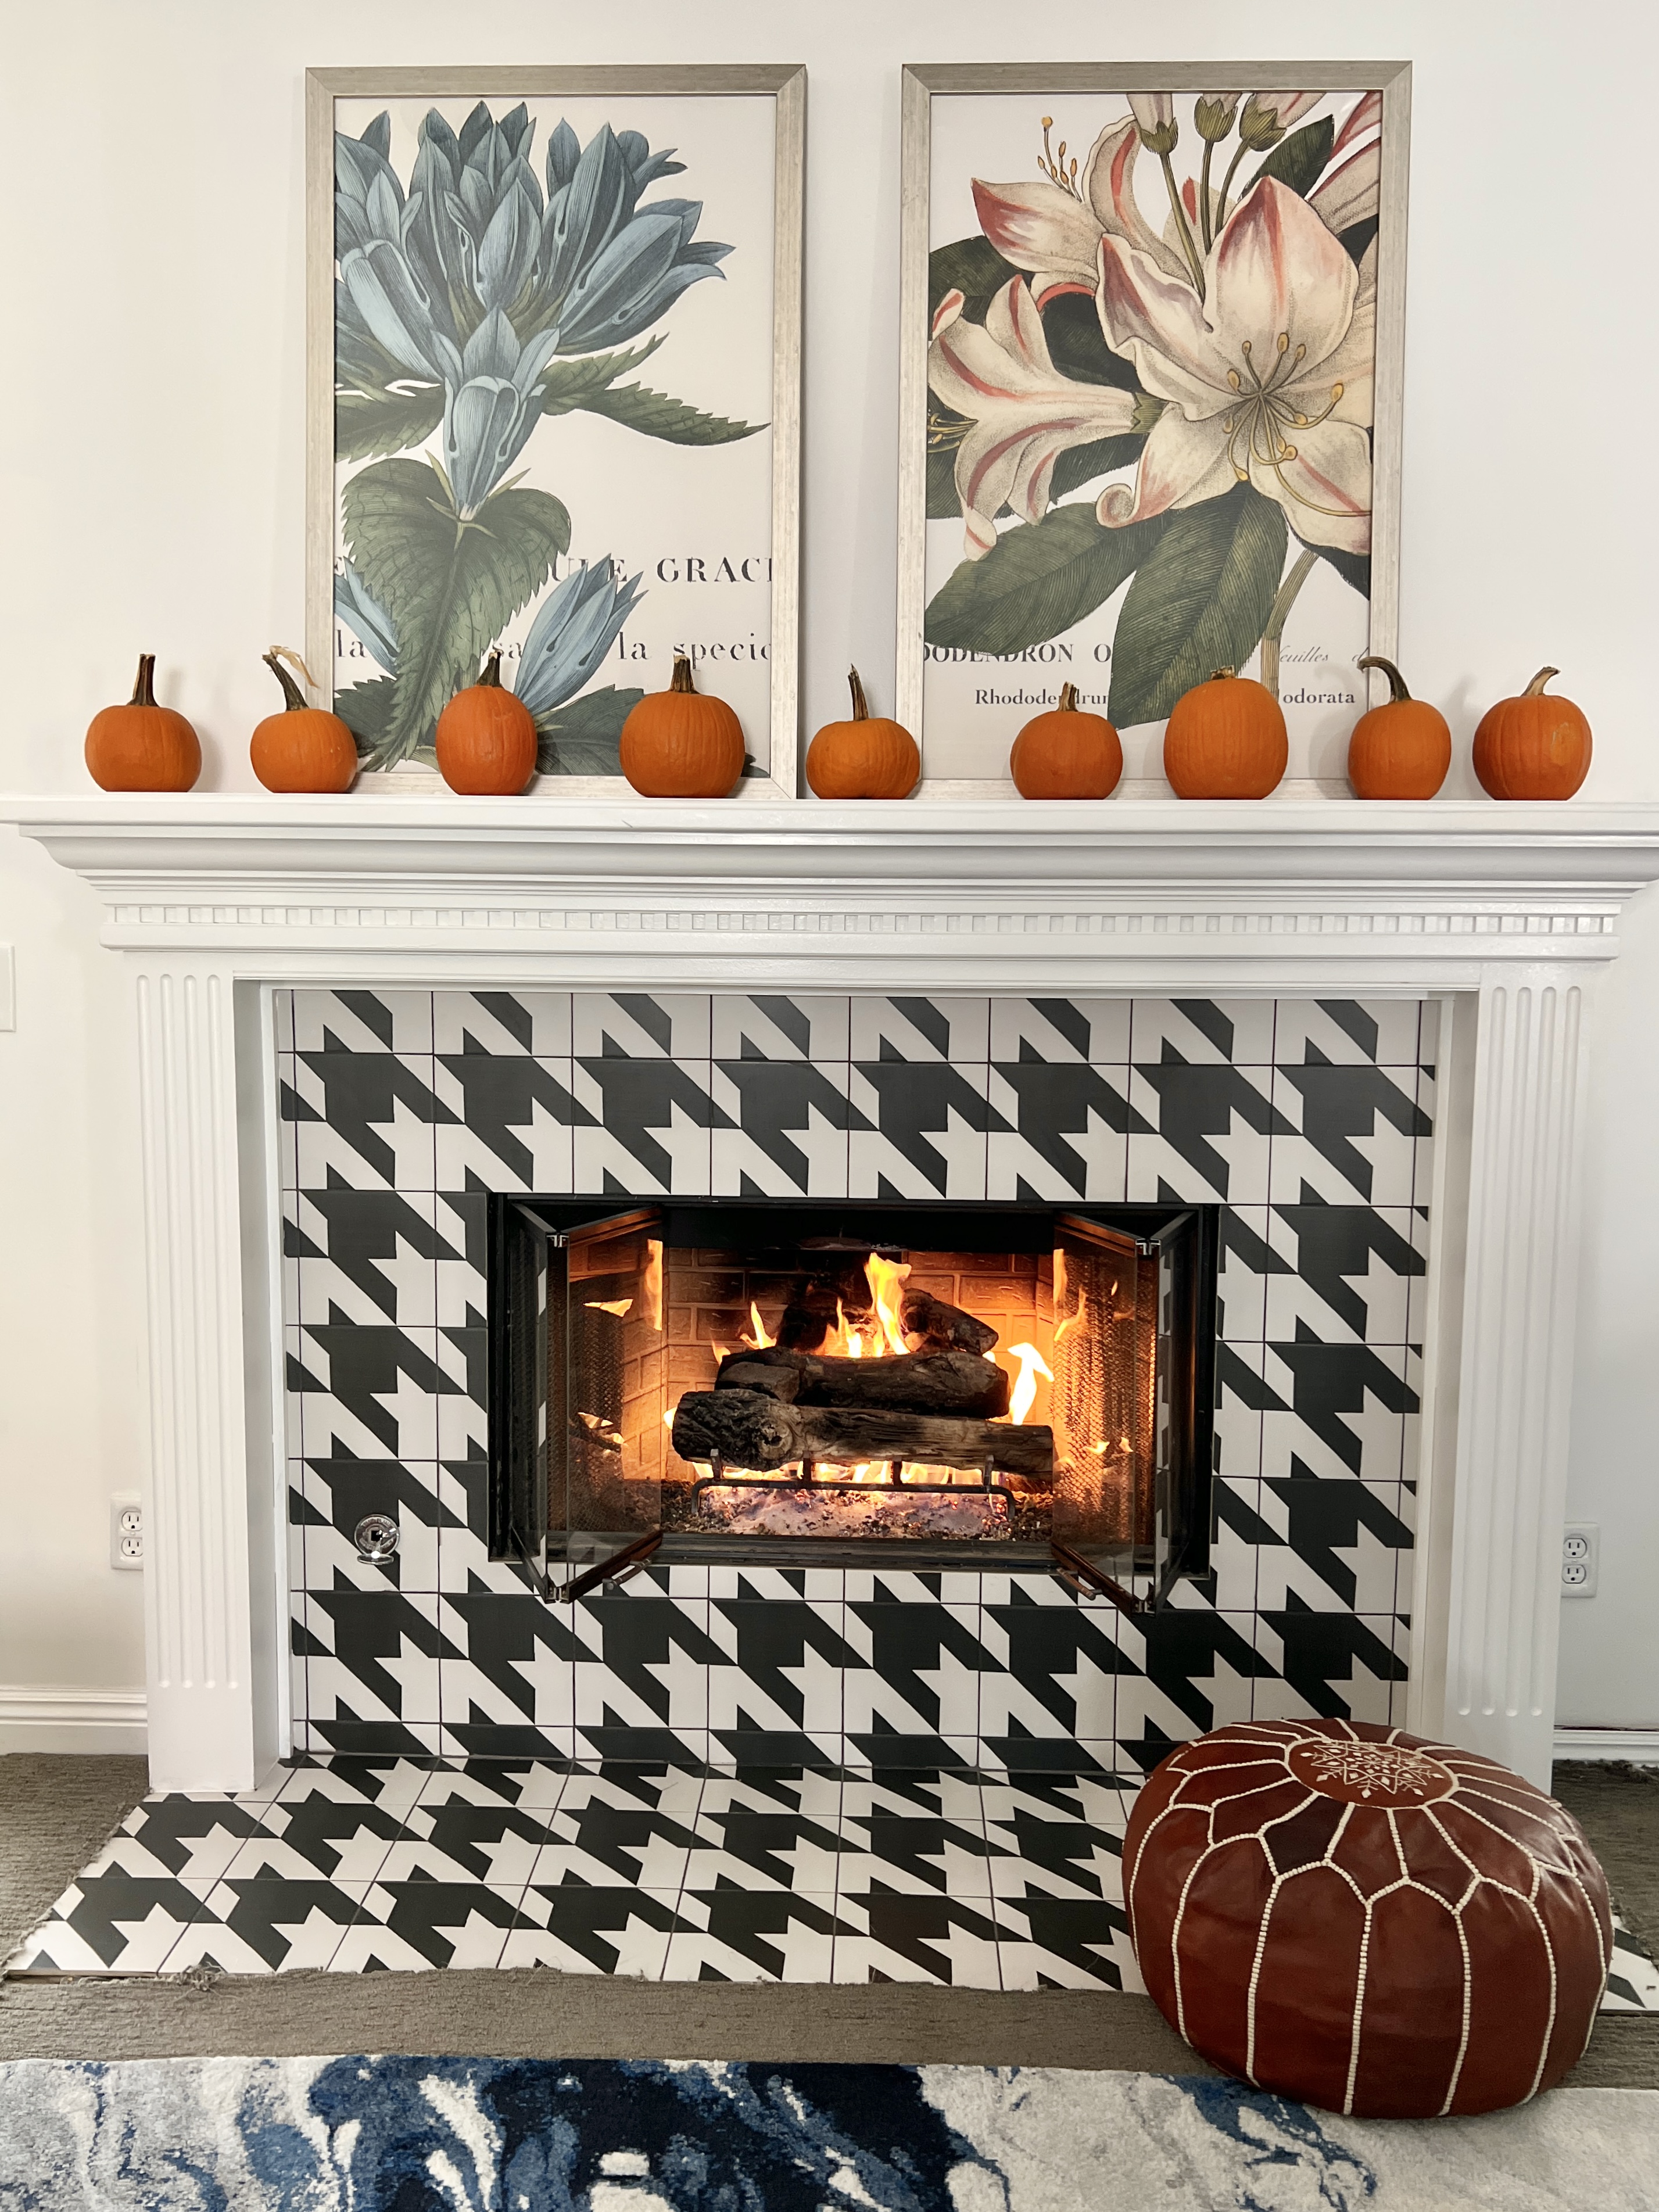 A frontal view of the fireplace with sugar pumpkins displayed on the mantel as simple yet dramatic fall decor.